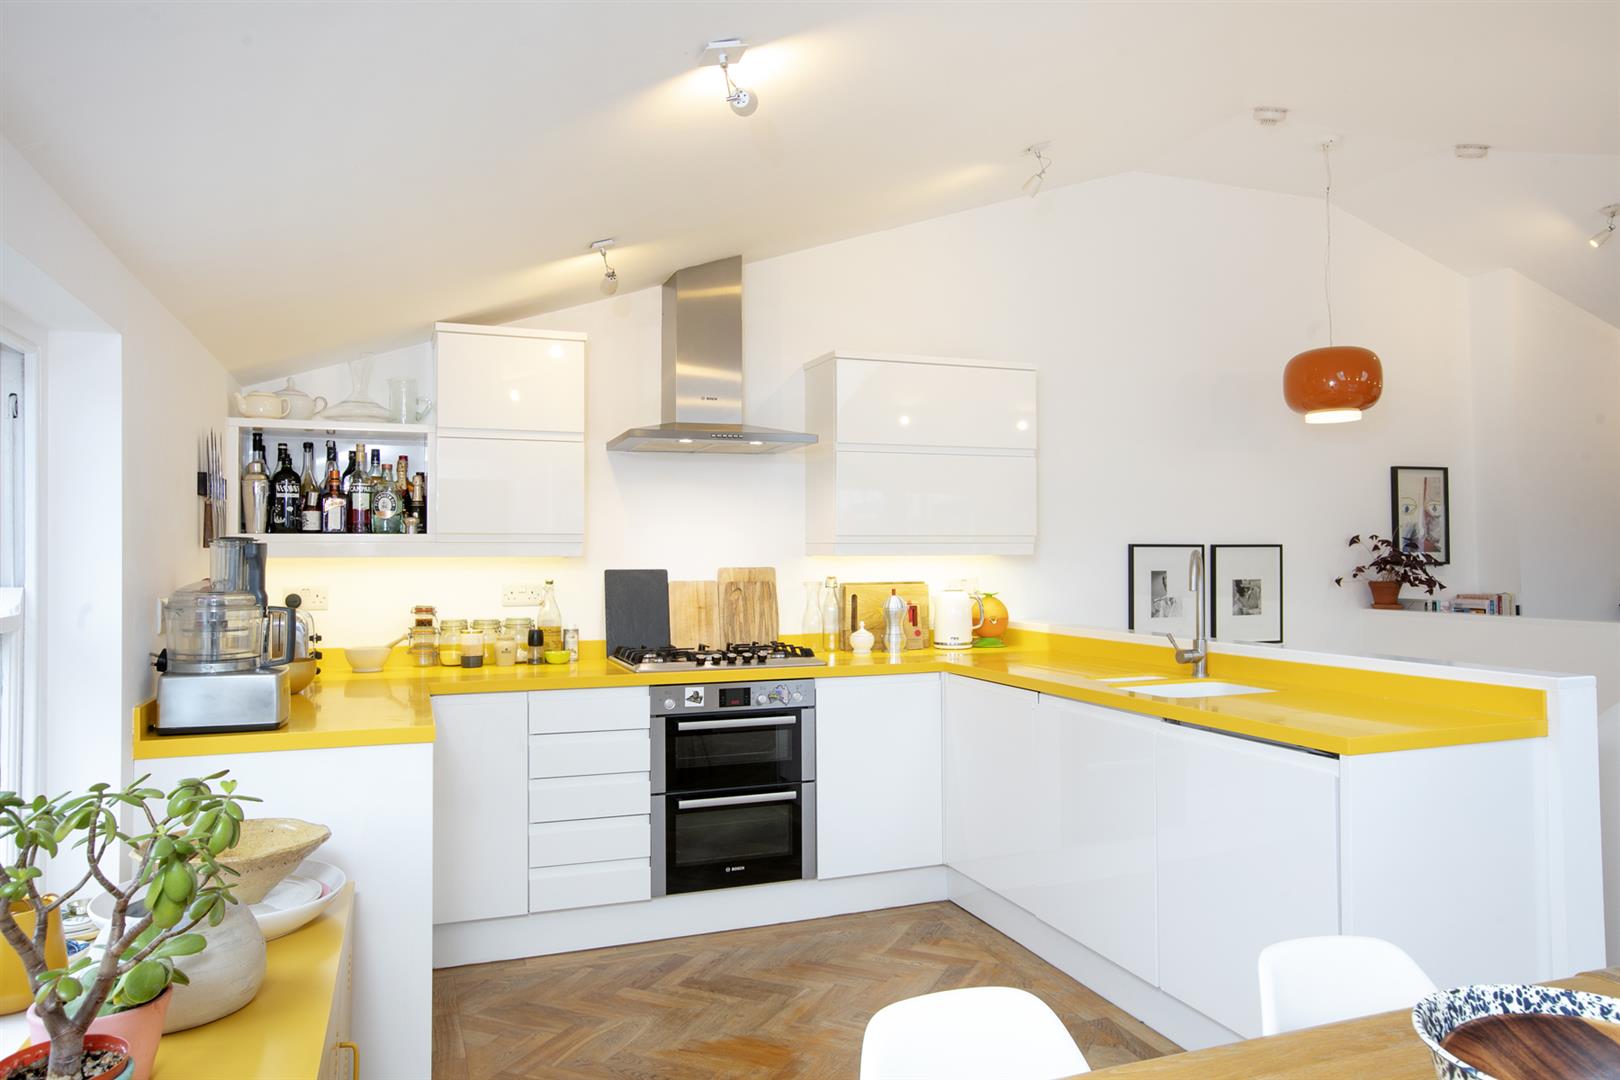 Flat - Conversion Under Offer in Holly Grove, Peckham, SE15 893 view8